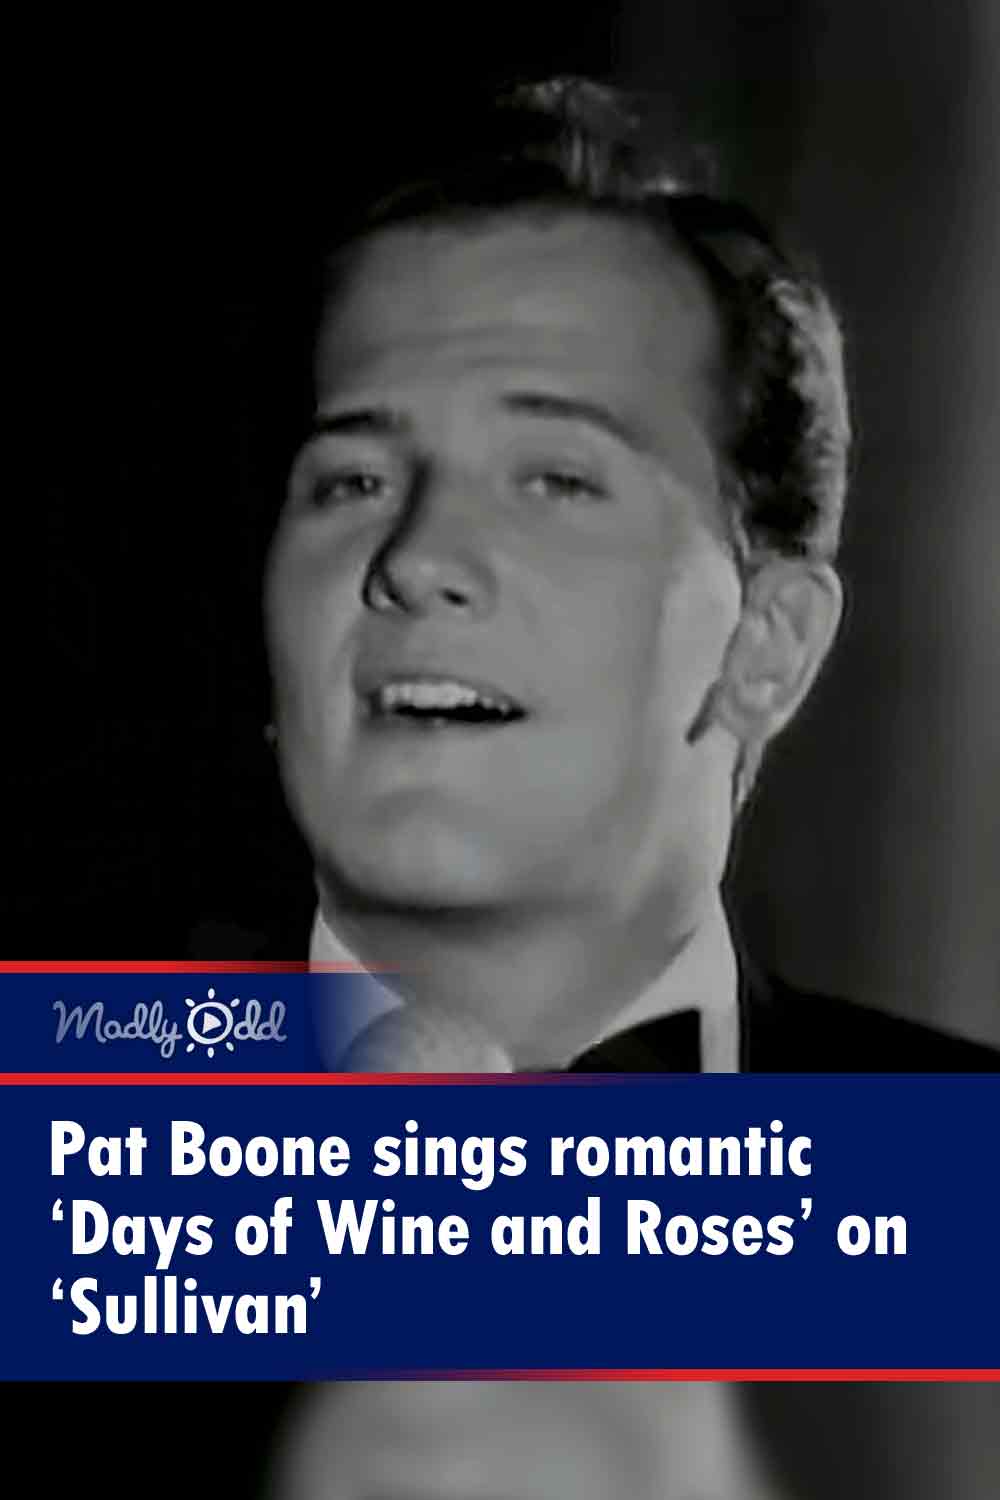 Pat Boone sings romantic ‘Days of Wine and Roses’ on ‘Sullivan’